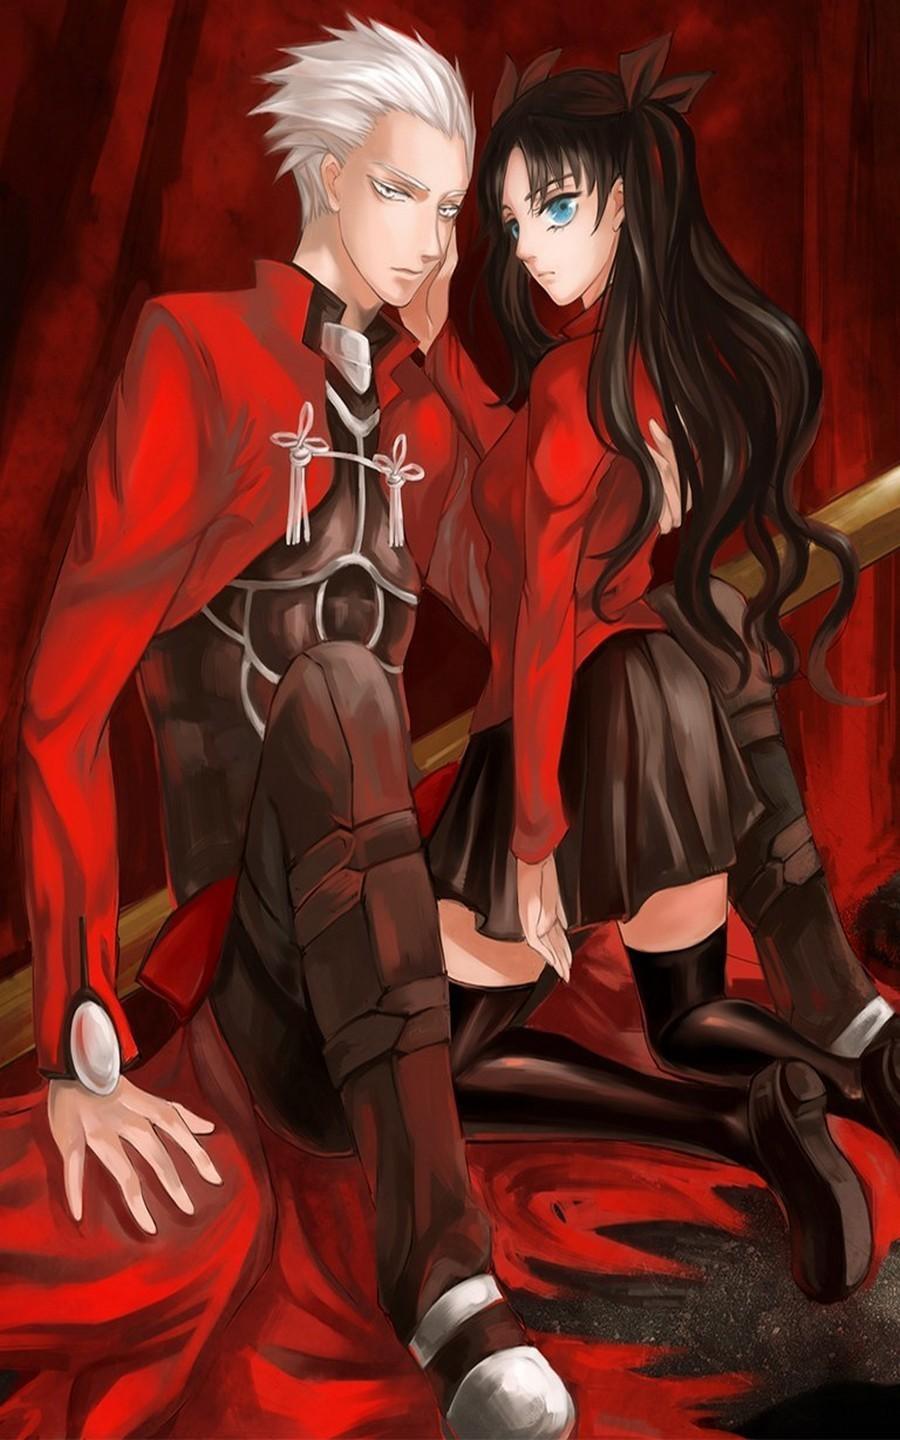 Android 用の Archer Fate Stay Wallpaper Art Hd Apk をダウンロード